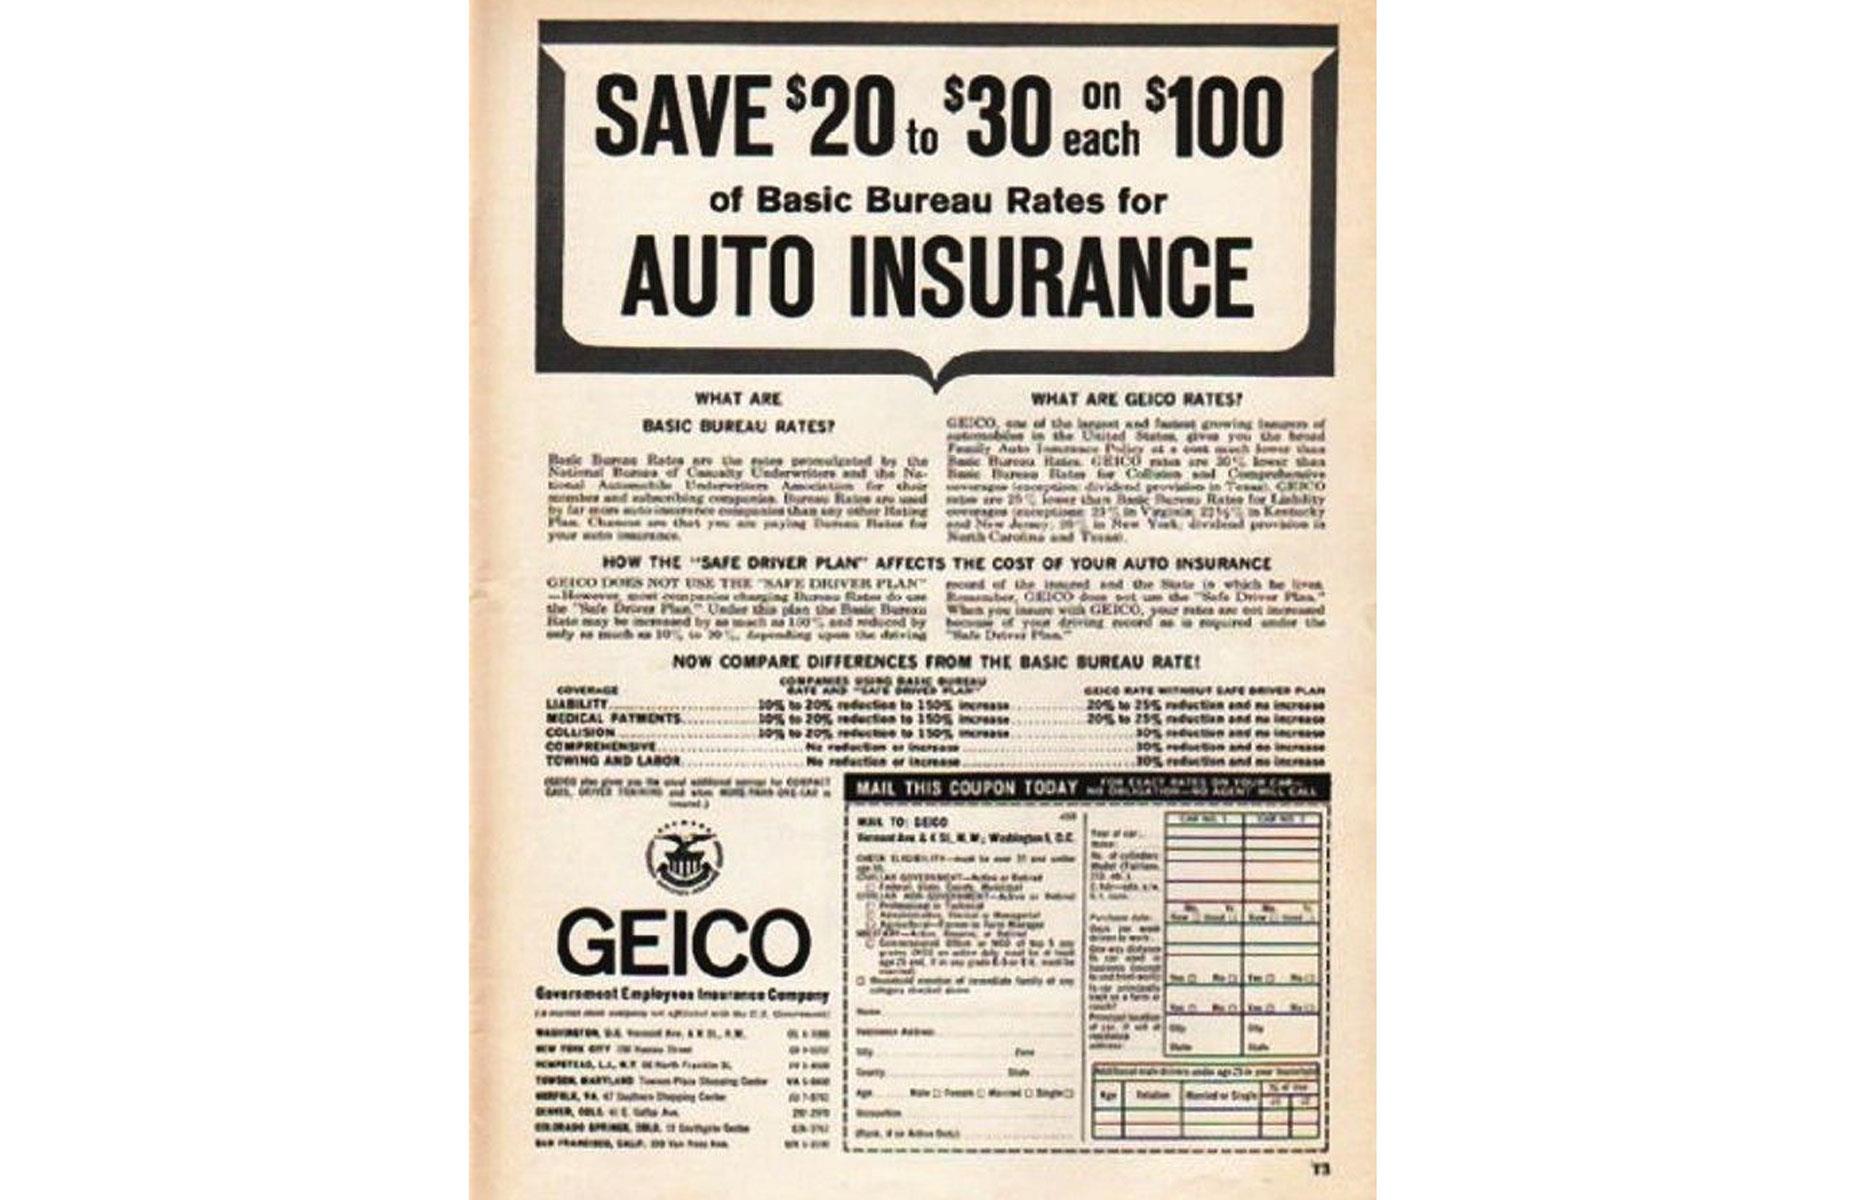 1948 – GEICO: $1,000 invested then is worth millions of dollars today